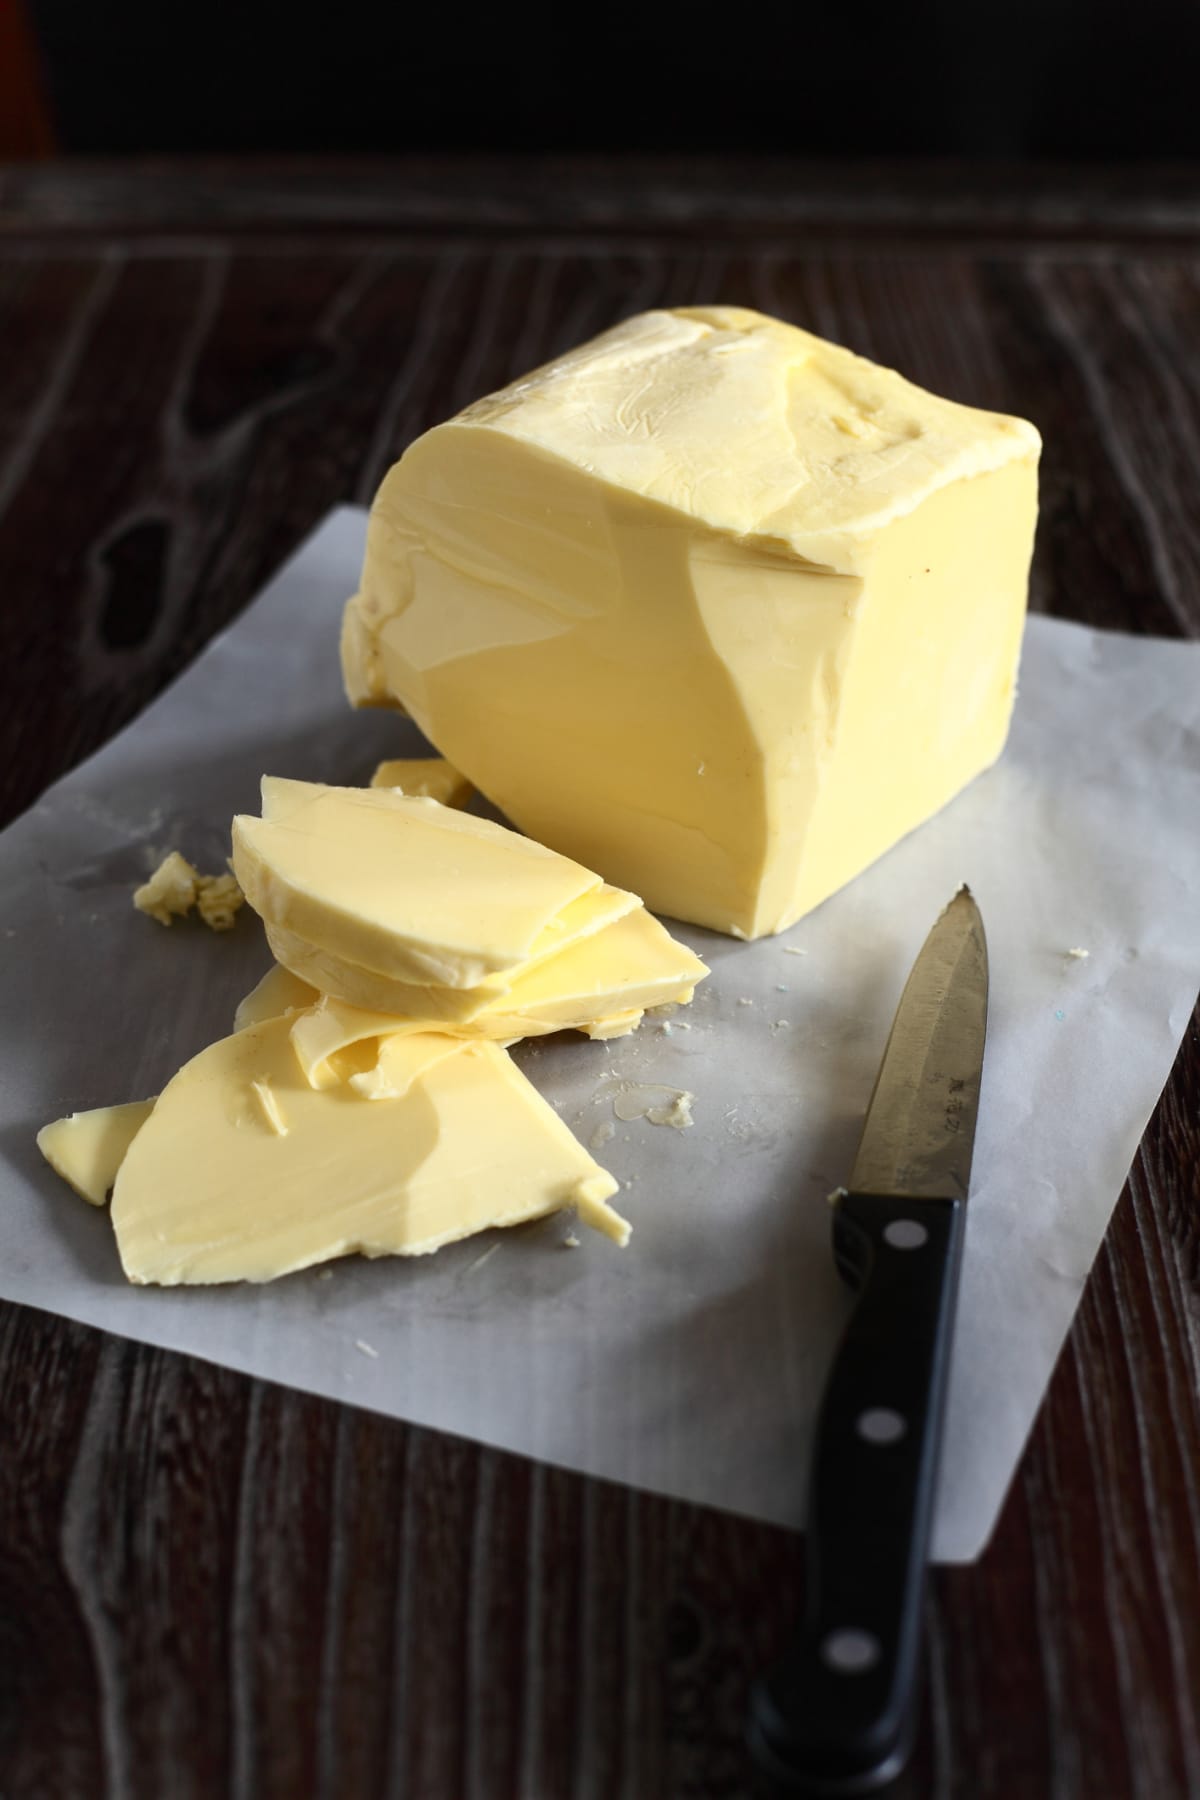 Block of butter with slices cut off